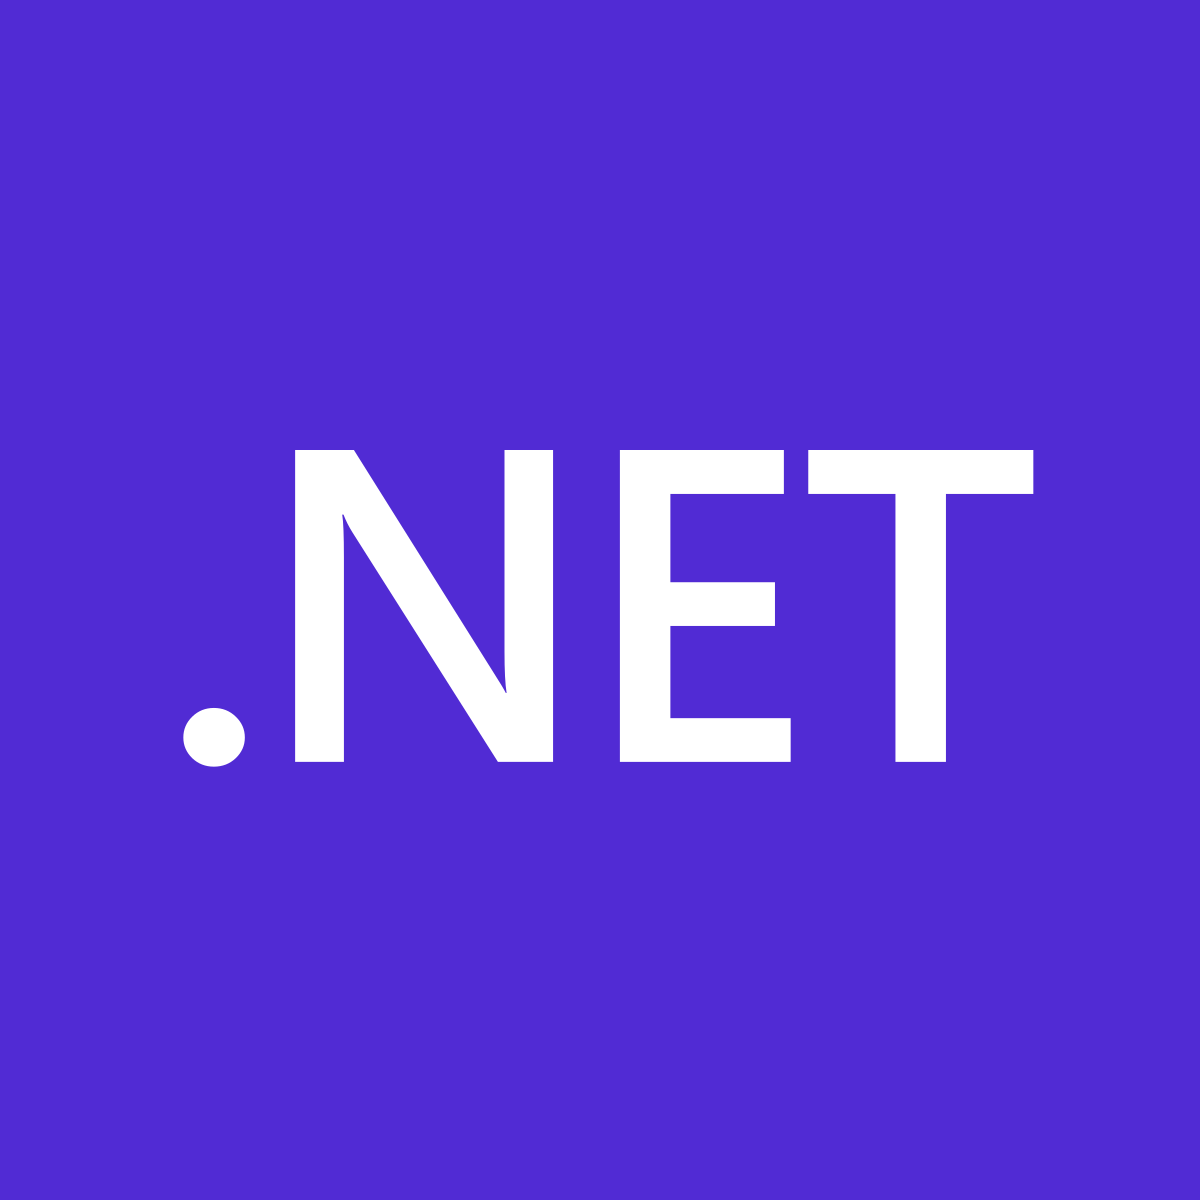 What is .NET 5 and why is it so significant?